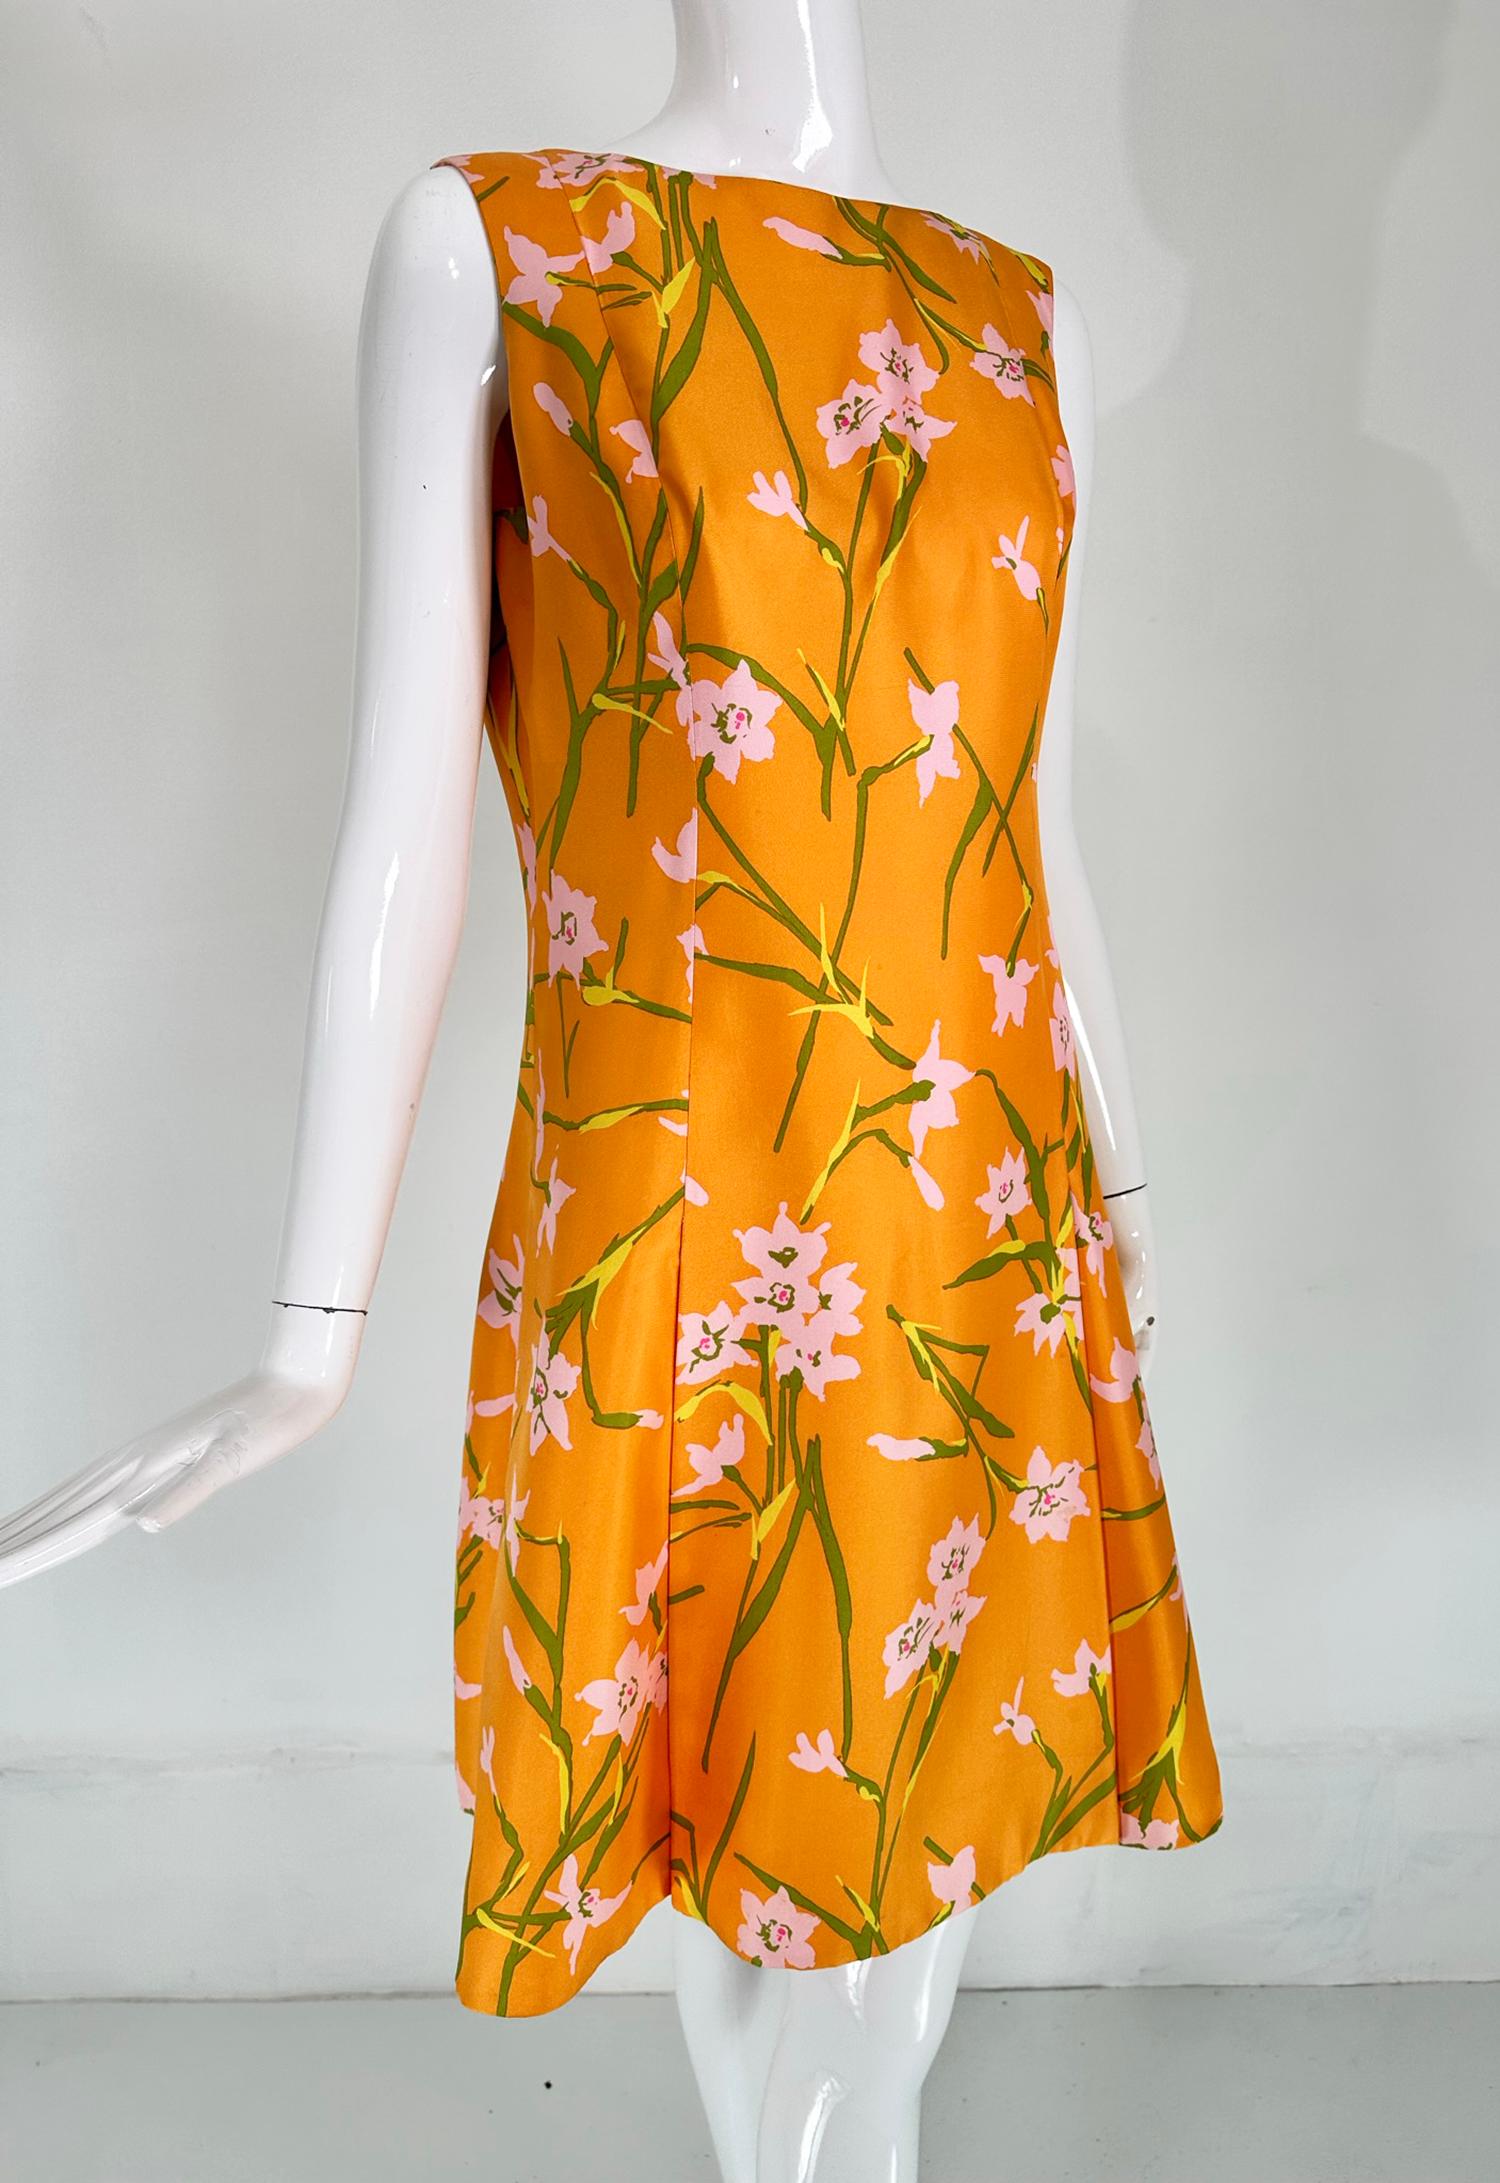 Sarmi orange floral printed silk, inverted pleat skirt sleeveless dress from the 1960s. Beautiful silk dress with a jewel neckline, sleeveless with princess seams, the dress has inverted pleats at the lower skirt front and back. The print is orange